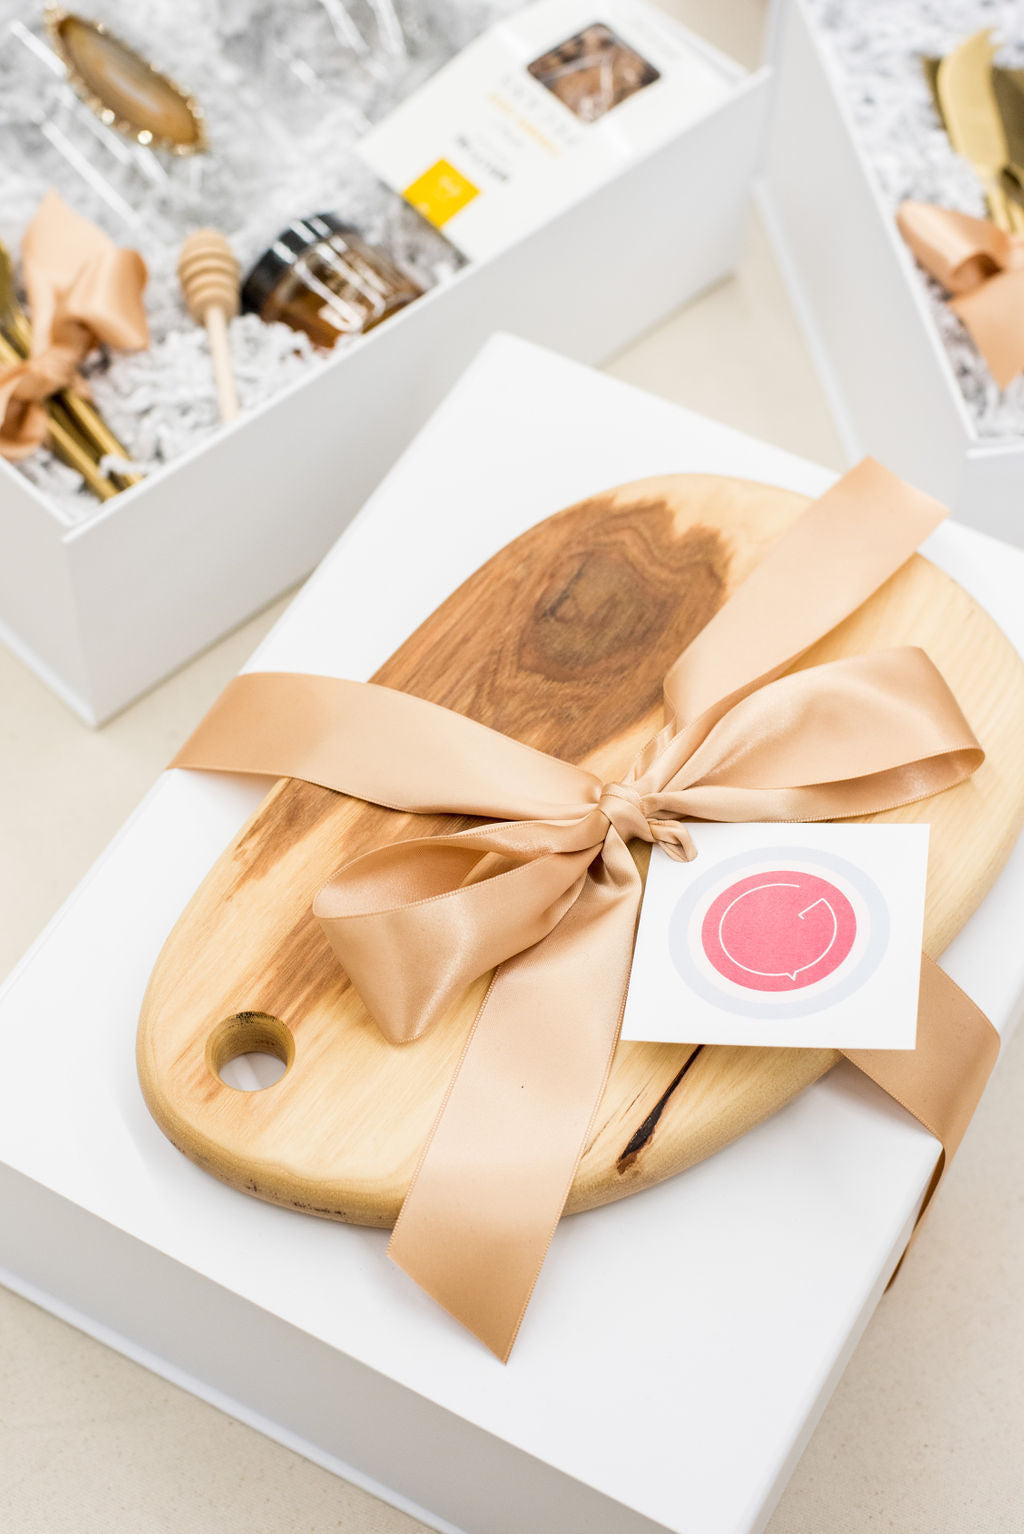 Curated gift box business Marigold & Grey reflects upon 2018 goals